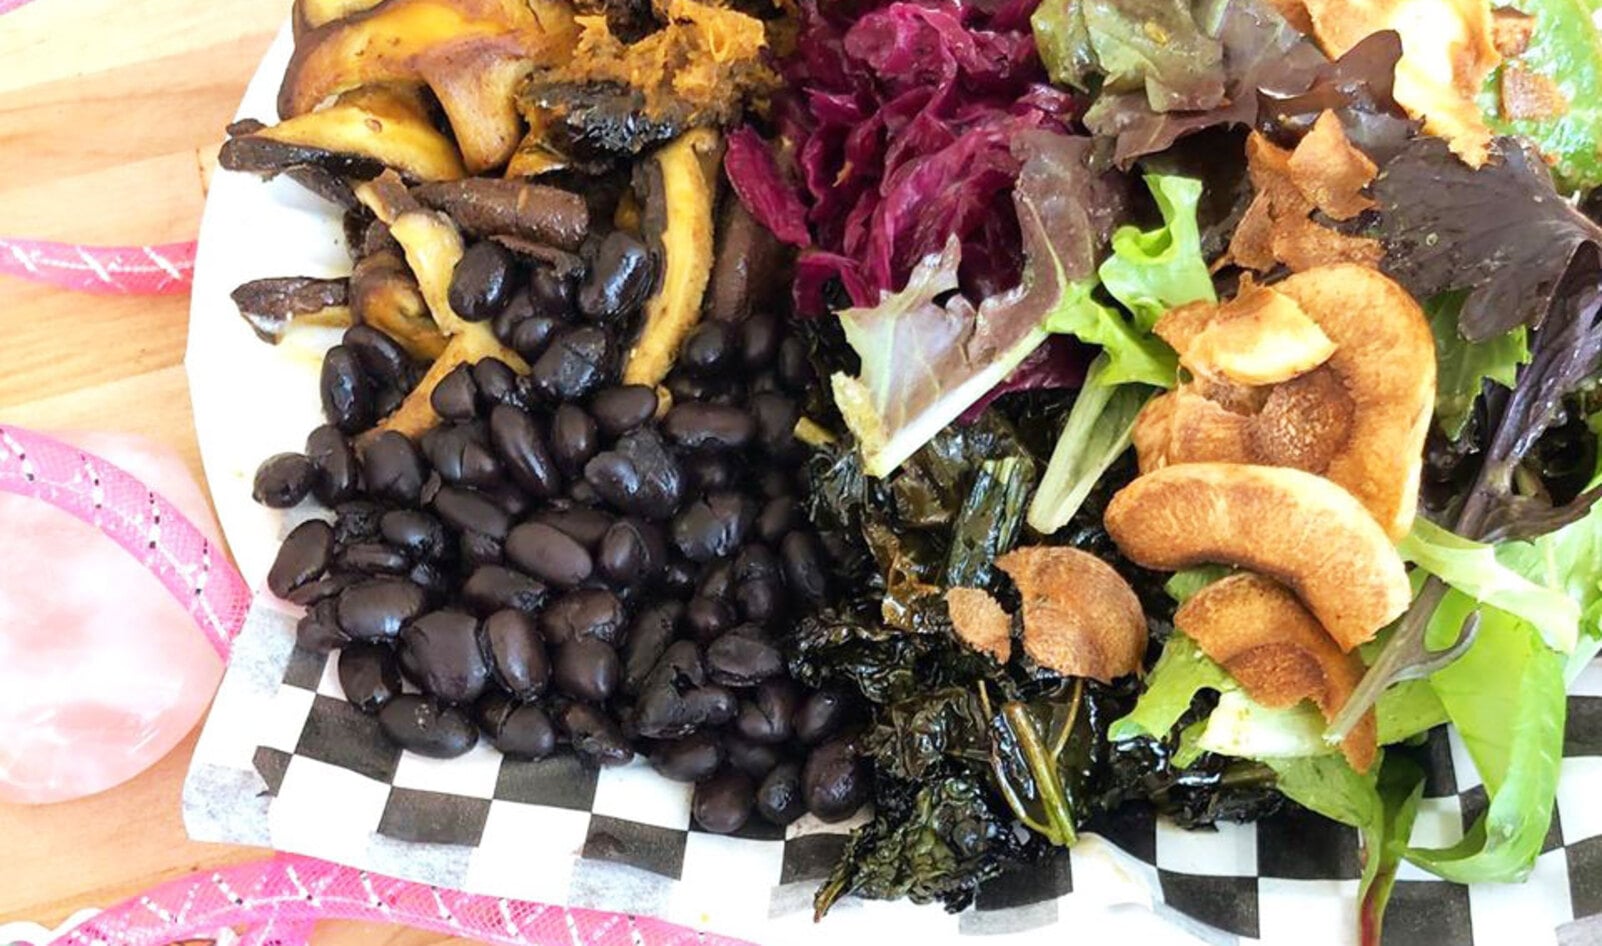 Trans POC Get Free Vegan Food at New Eatery Gay4U in Oakland